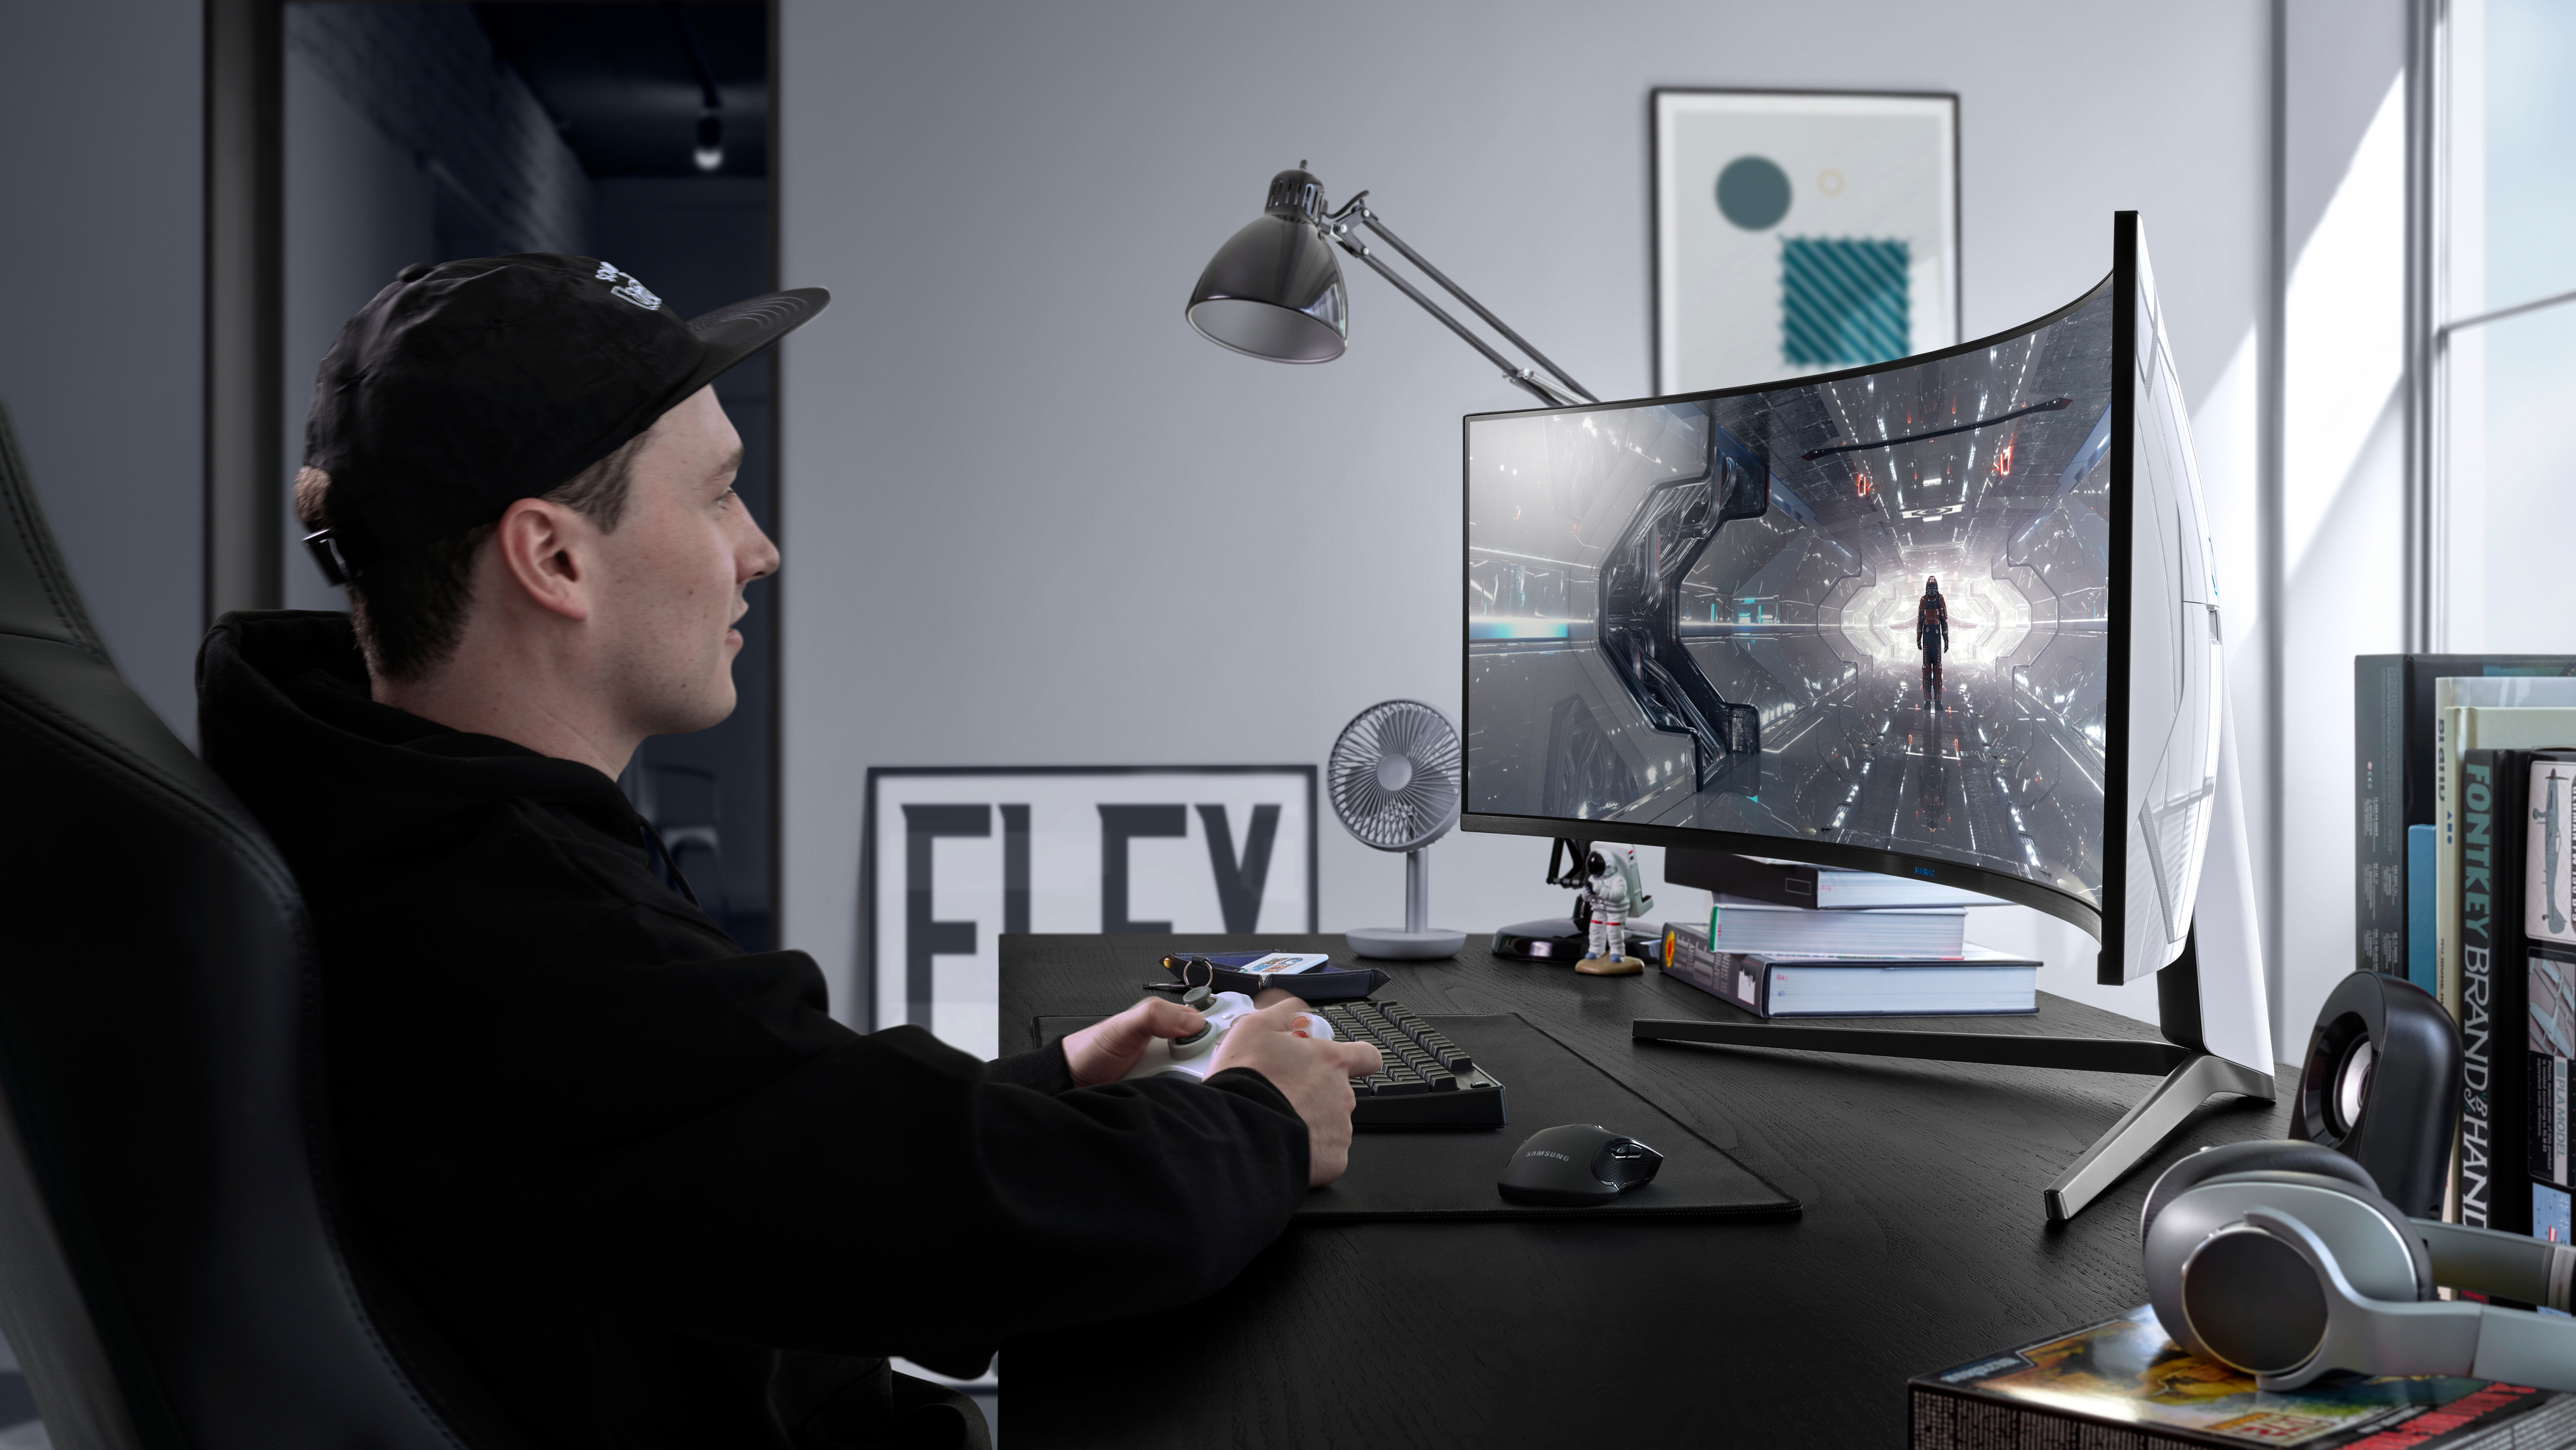 Enter a new dimension in gaming and plunge into worlds that come alive with a Samsung curved monitor.